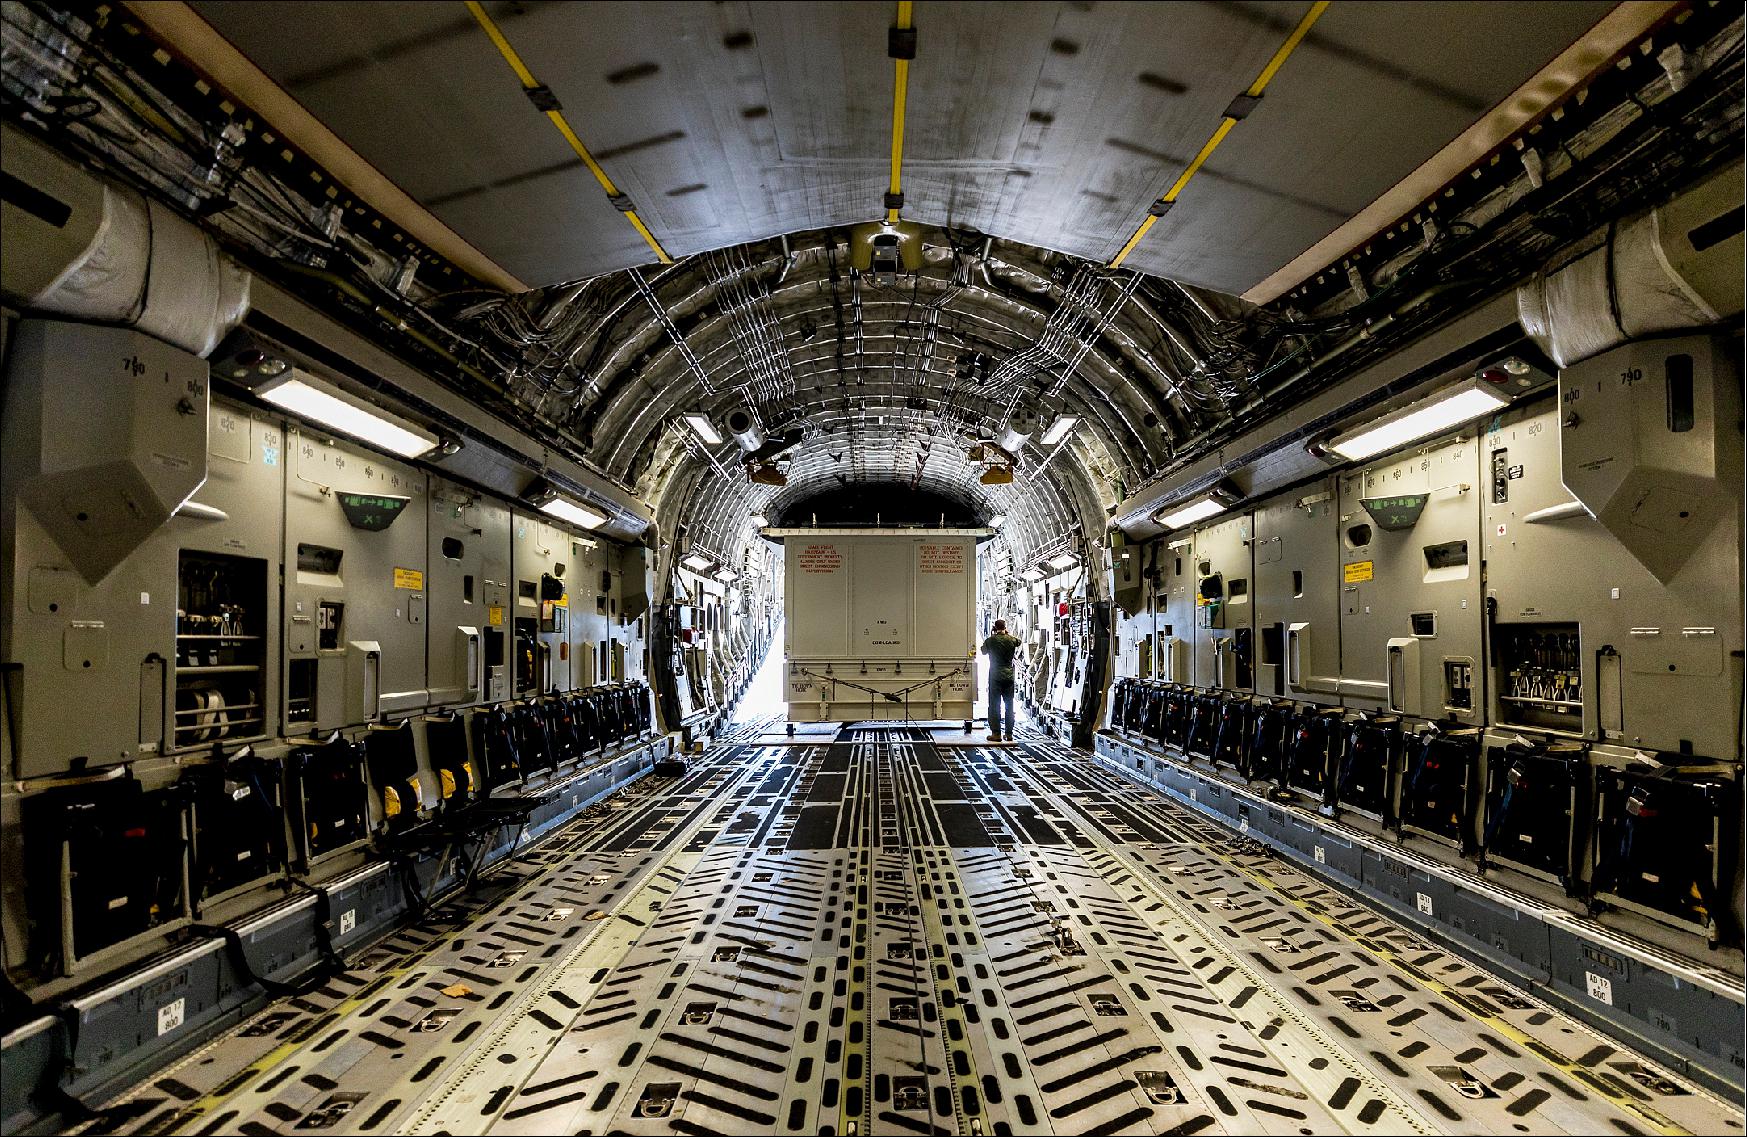 Figure 125: The custom shipping container holding NASA’s Parker Solar Probe is prepared for unloading from the C-17 of the United States Air Force’s 436th Airlift Wing after landing at Space Coast Regional Airport in Titusville, Florida, on the morning of April 3, 2018 (image credit: NASA/JHU-APL/Ed Whitman)